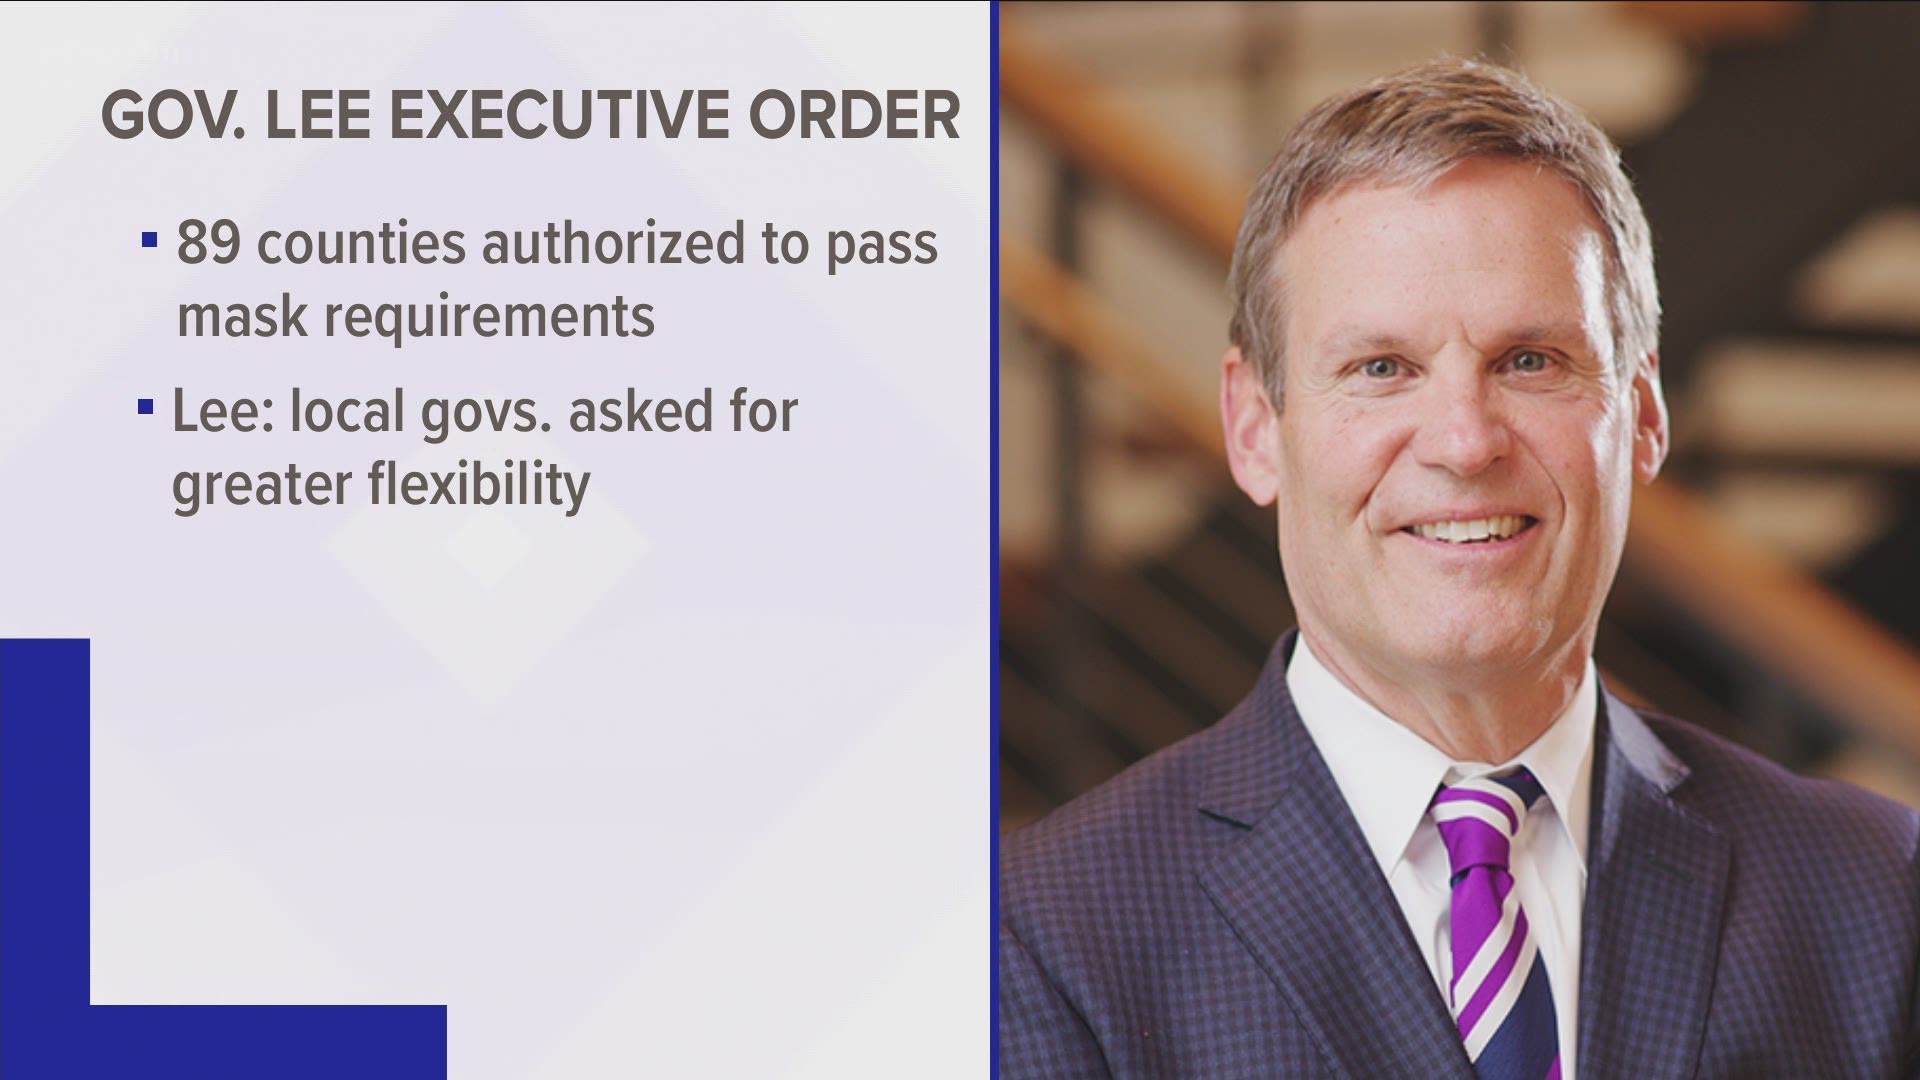 Governor Bill Lee signed an executive order granting mayors of 89 counties the authority to issue local mask requirements.